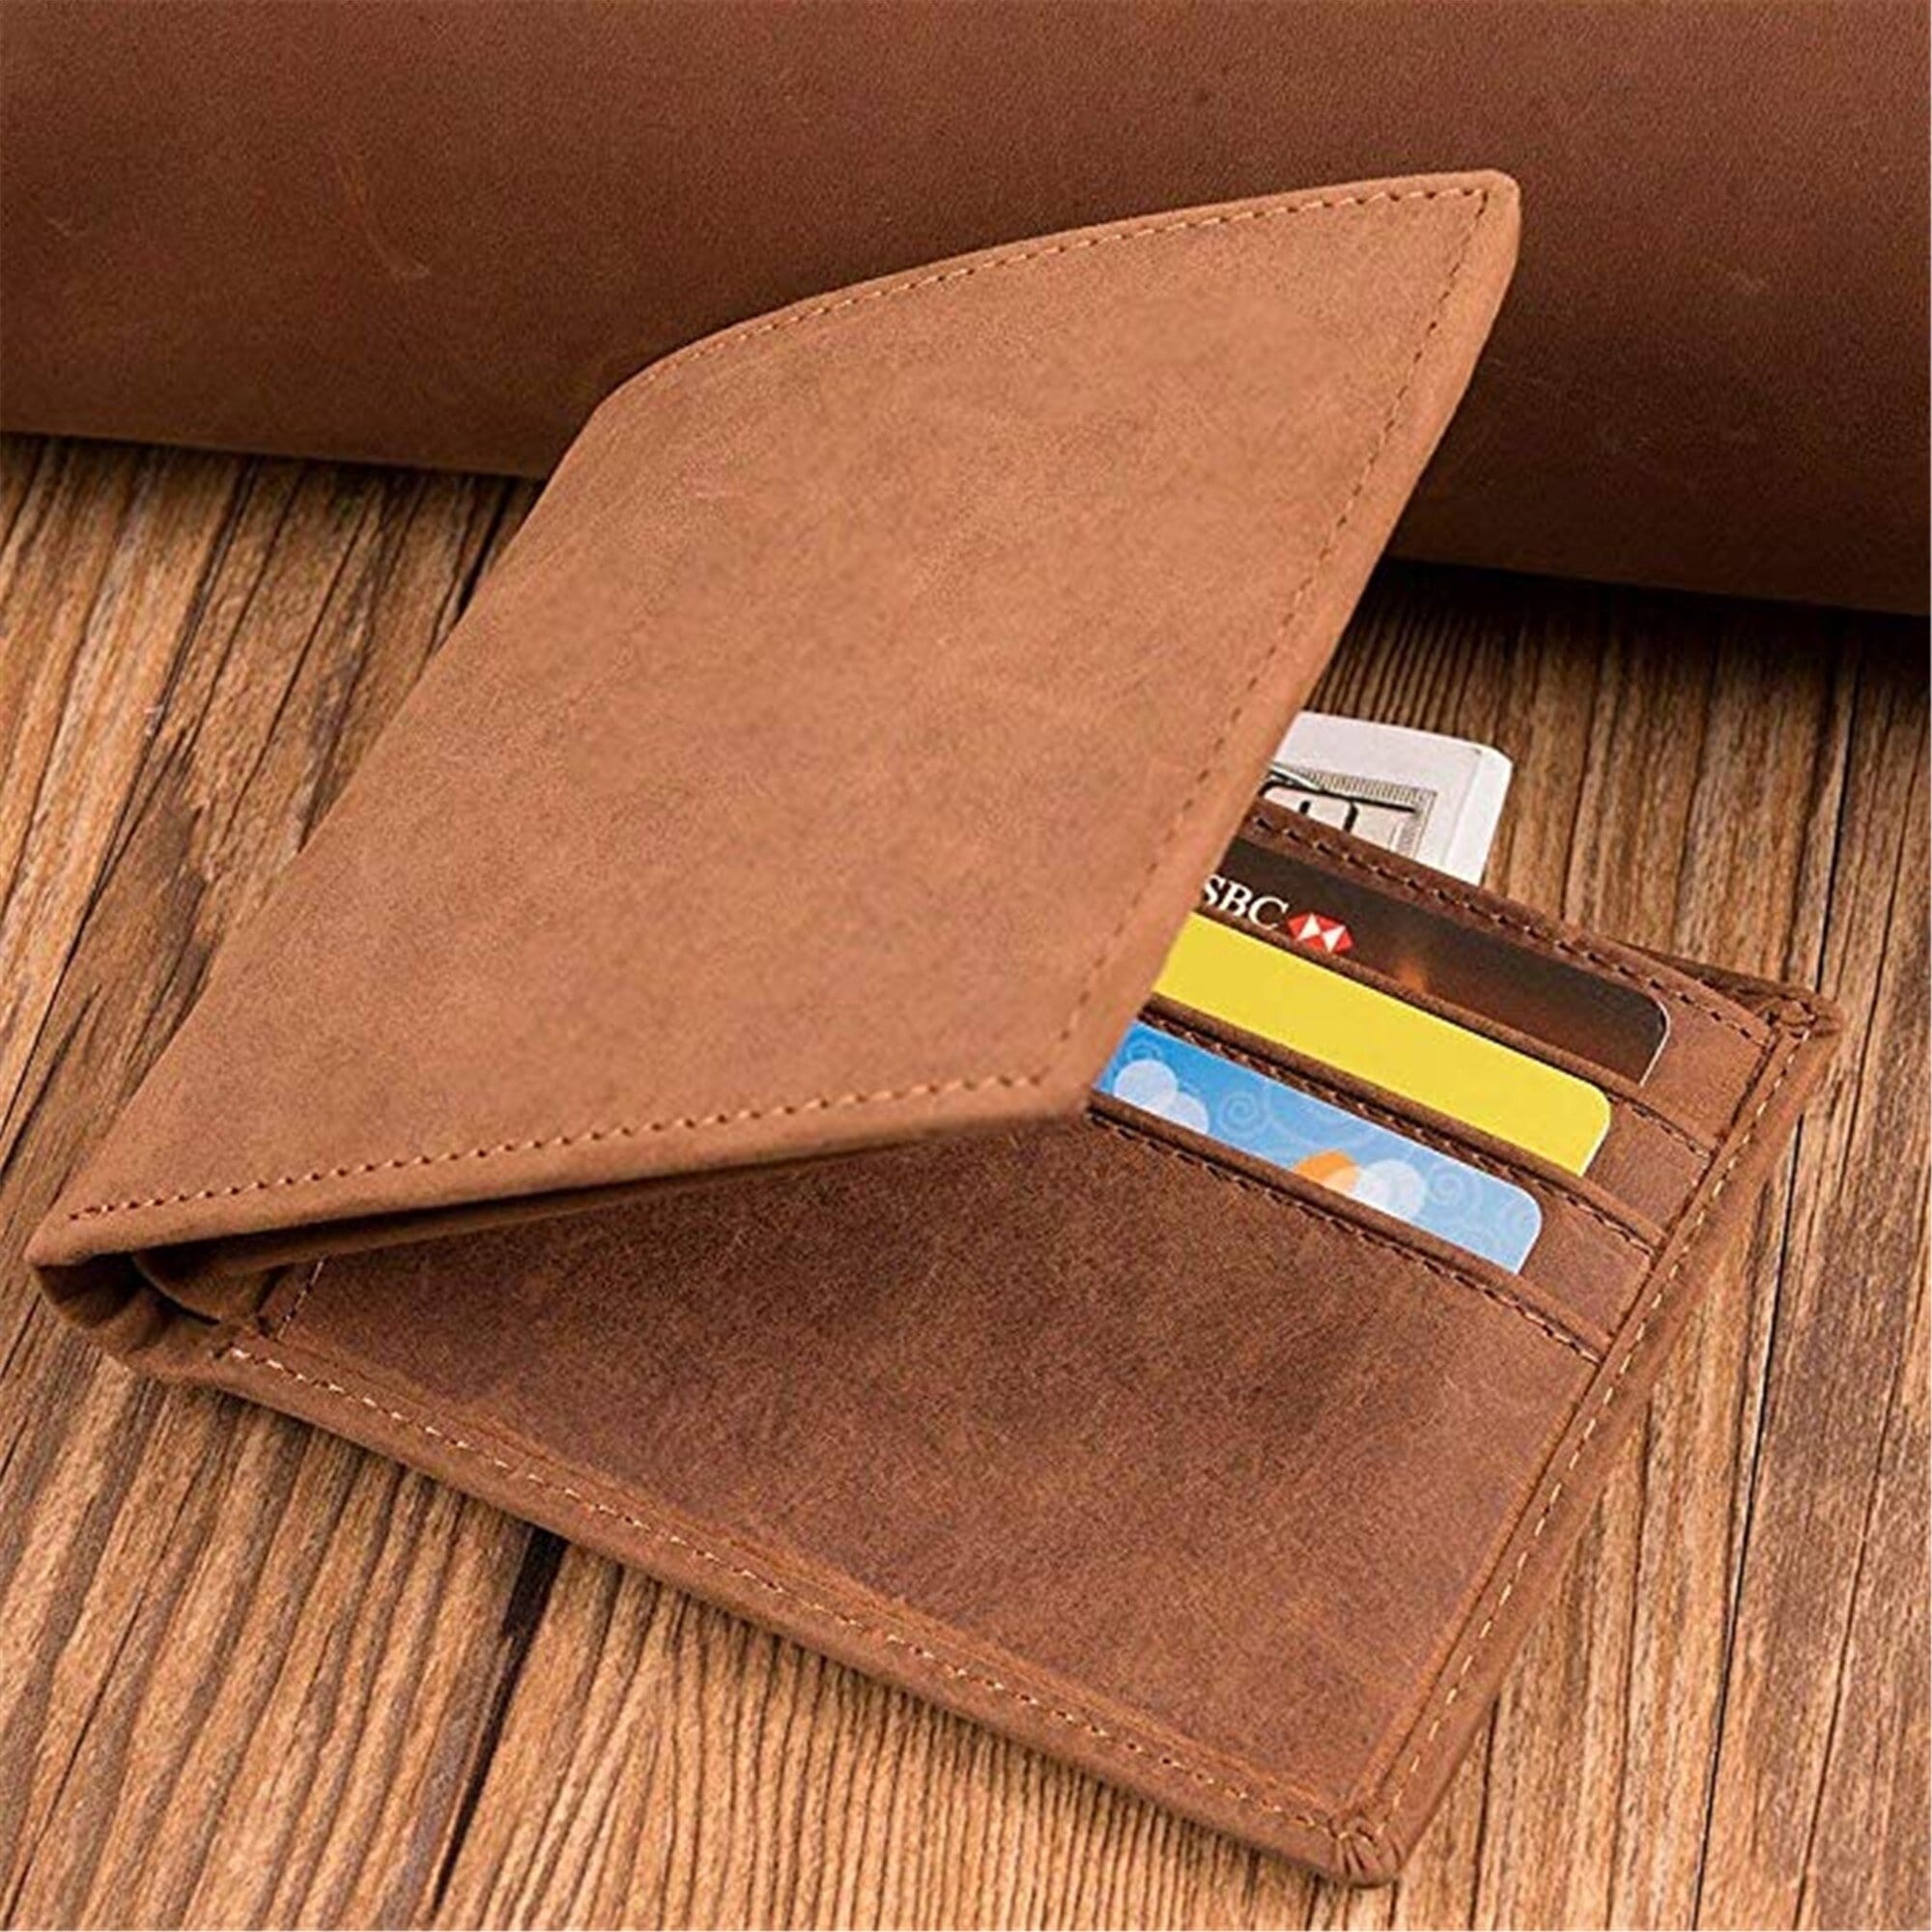 Wallets Grandma To Grandson - Love You For The Rest Of Mine Bifold Leather Wallet Gift Card GiveMe-Gifts